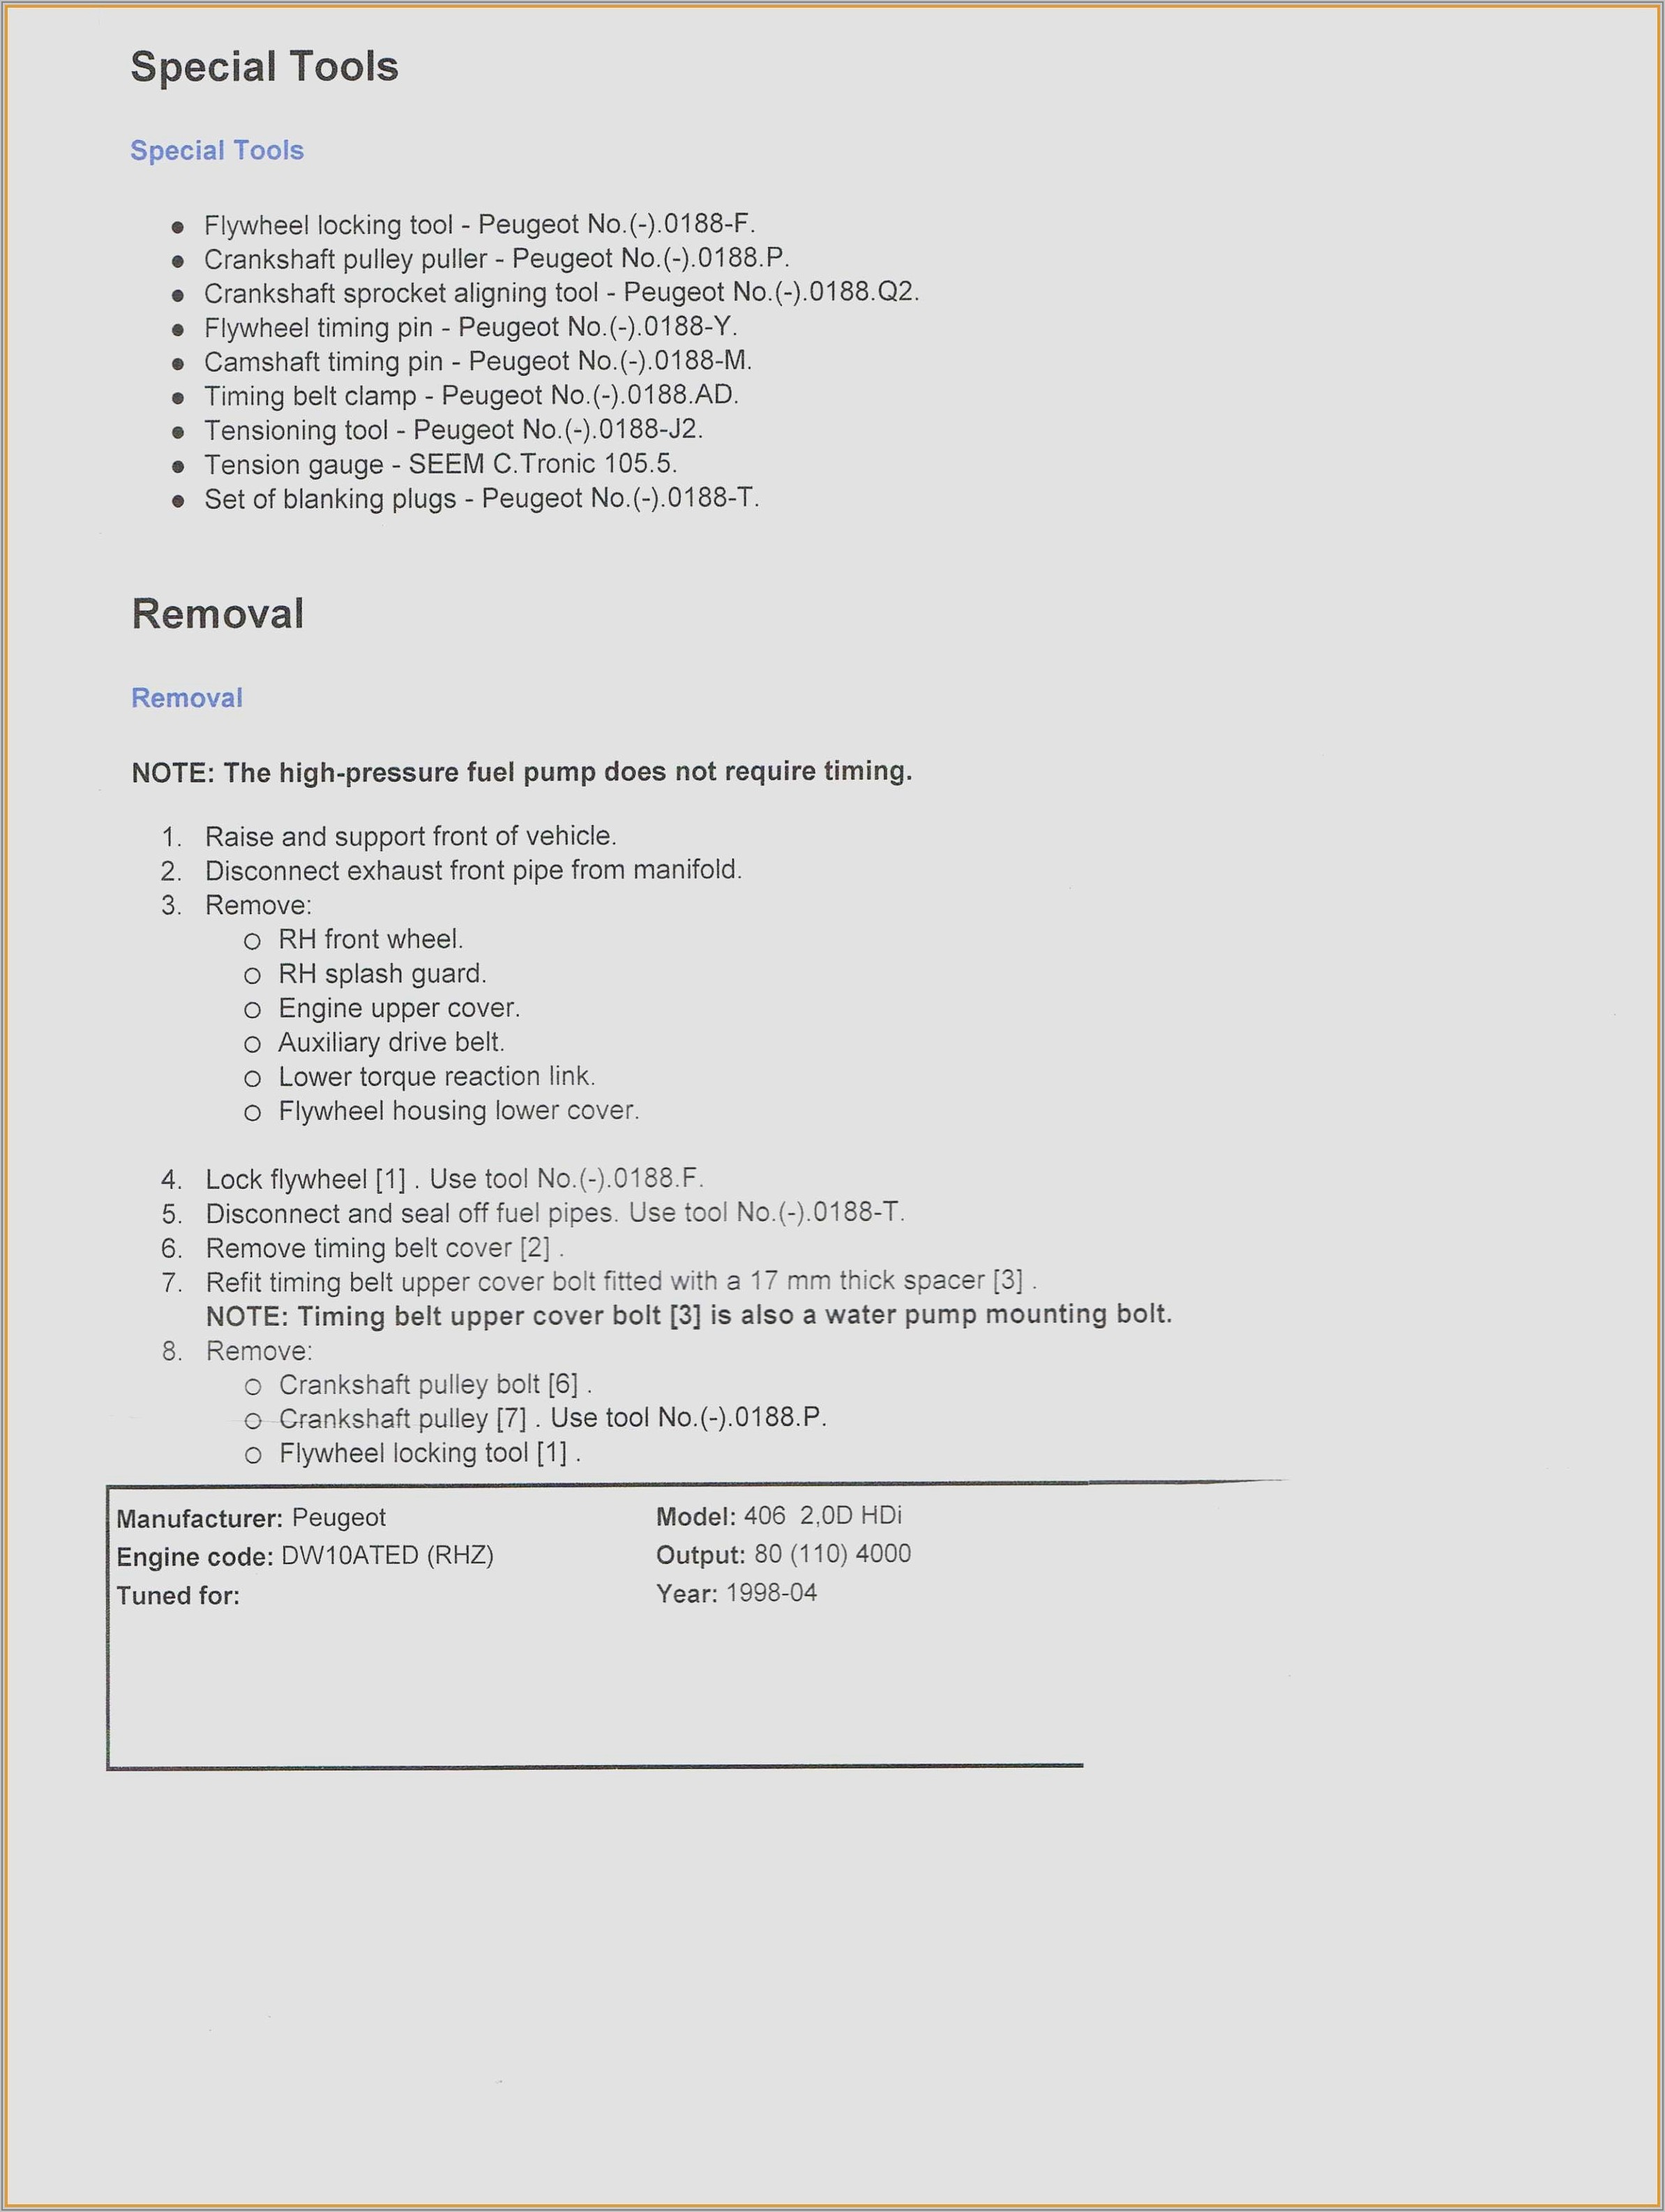 Resume Samples For Testing Professionals